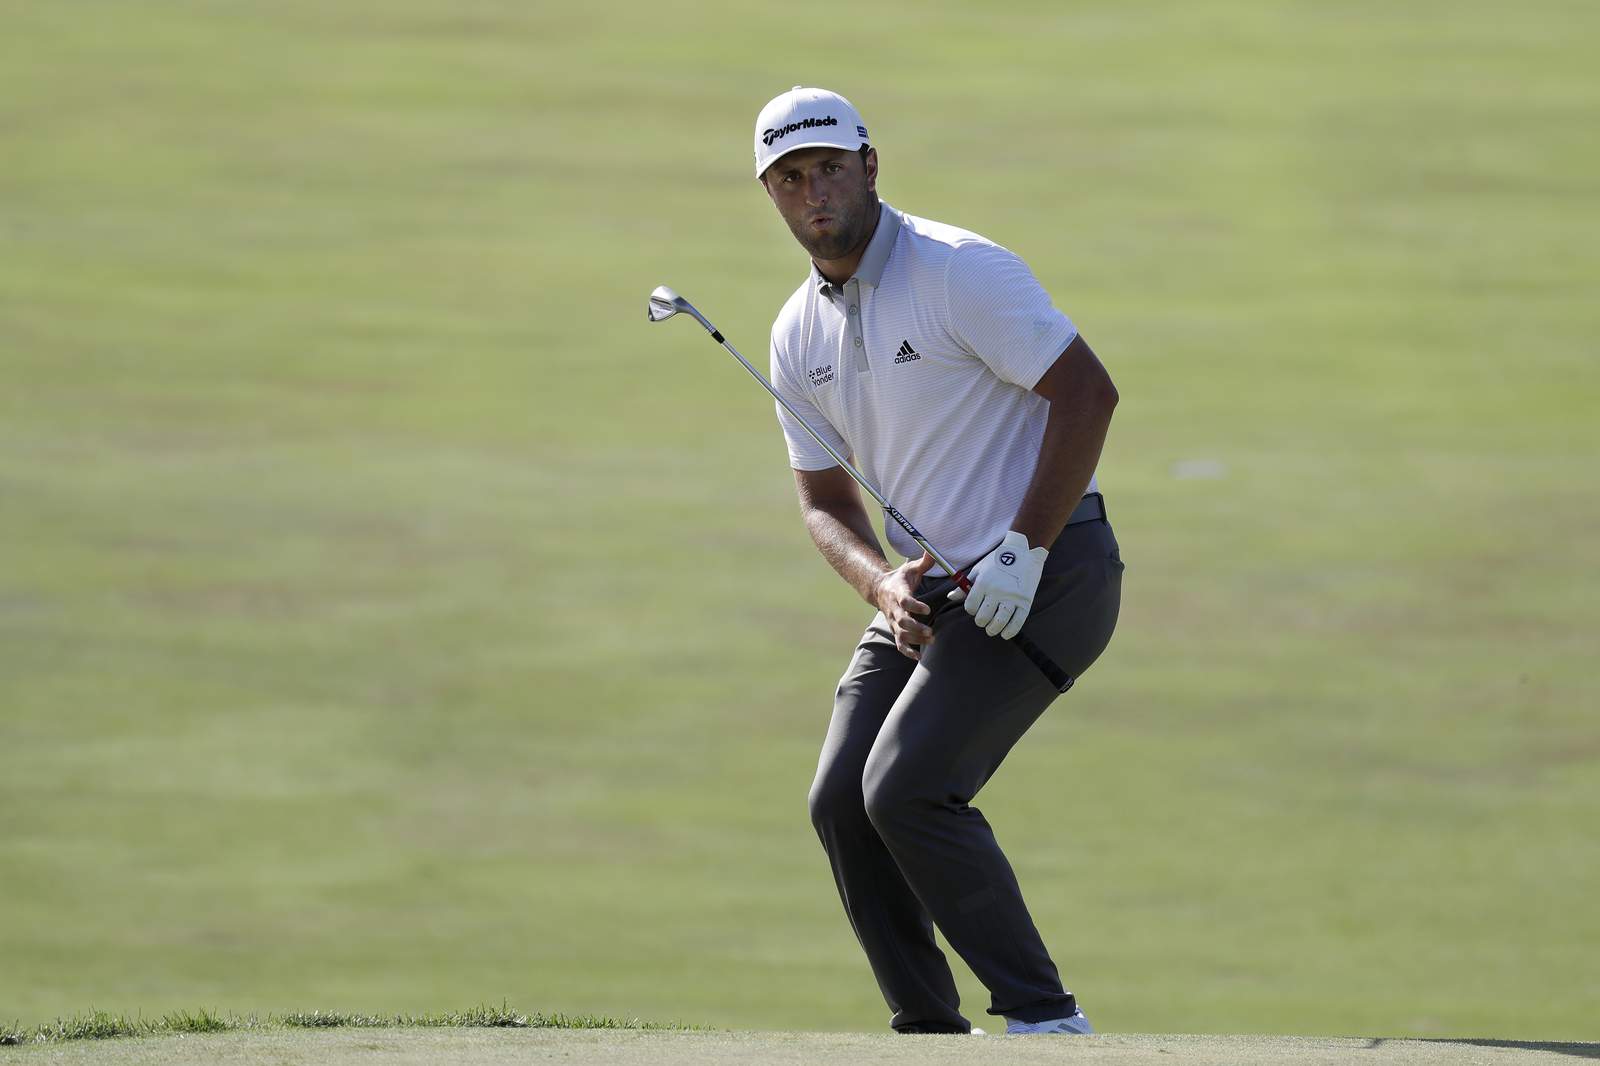 Rahm builds 4-shot lead at Memorial in his quest to be No. 1